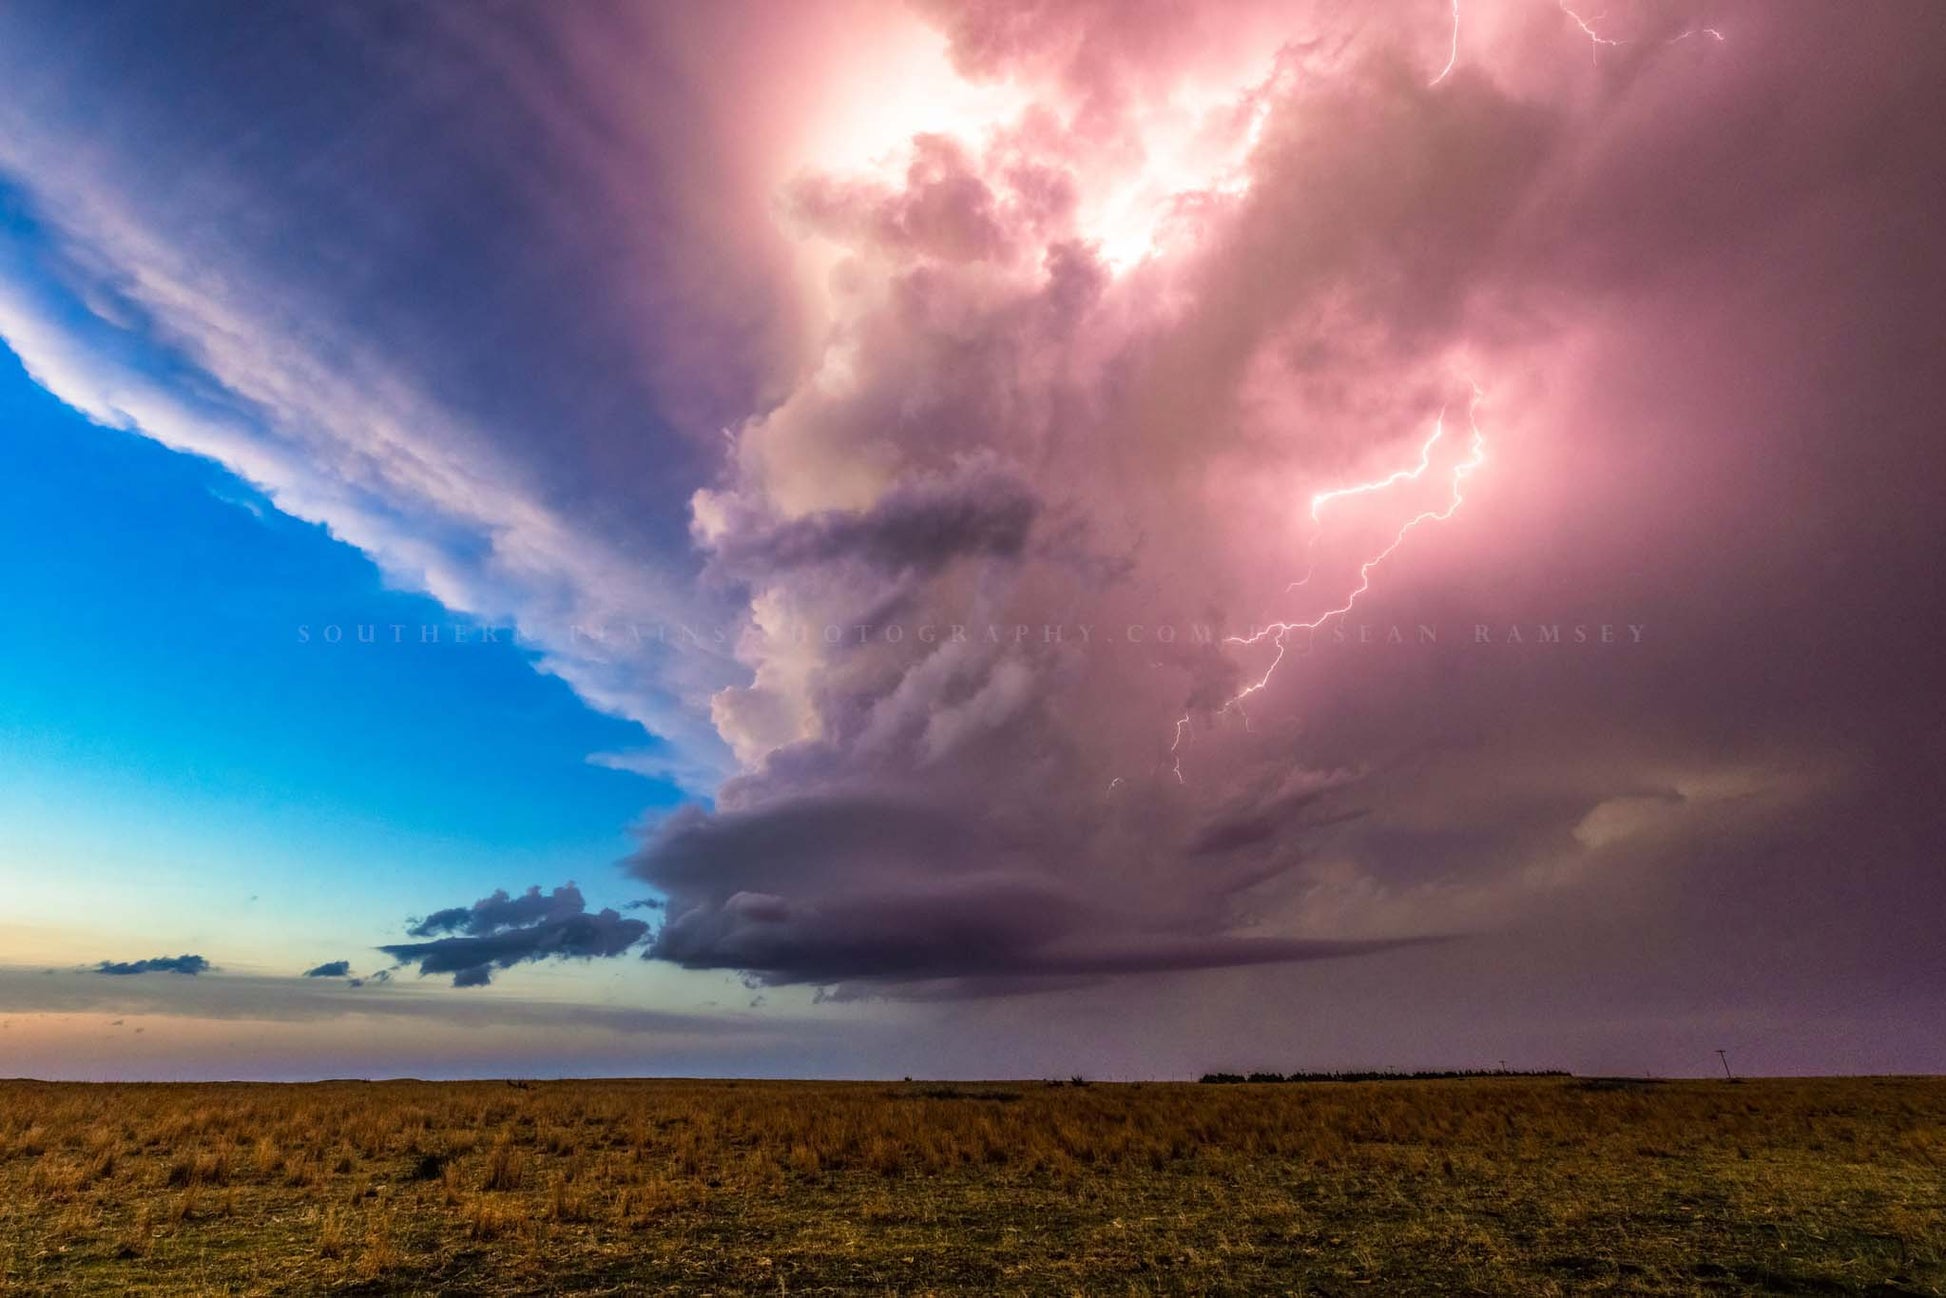 Storm photography print of a supercell thunderstorm illuminated by lightning at dusk on a stormy spring evening in Kansas by Sean Ramsey of Southern Plains Photography.